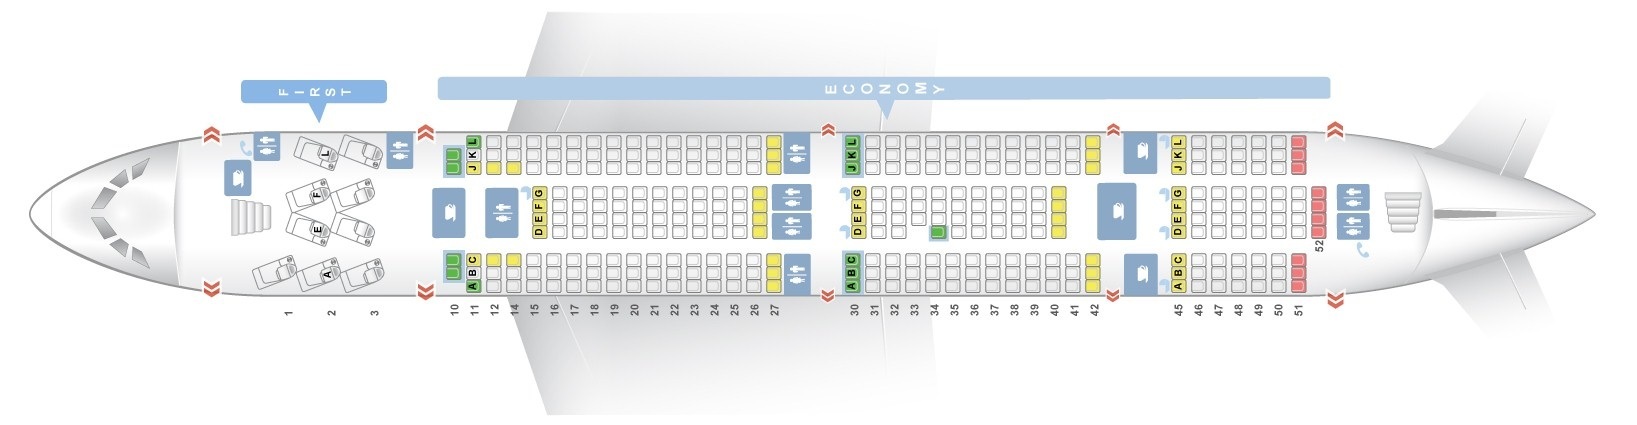 Seat map Airbus A380-800 Air France. Best seats in plane